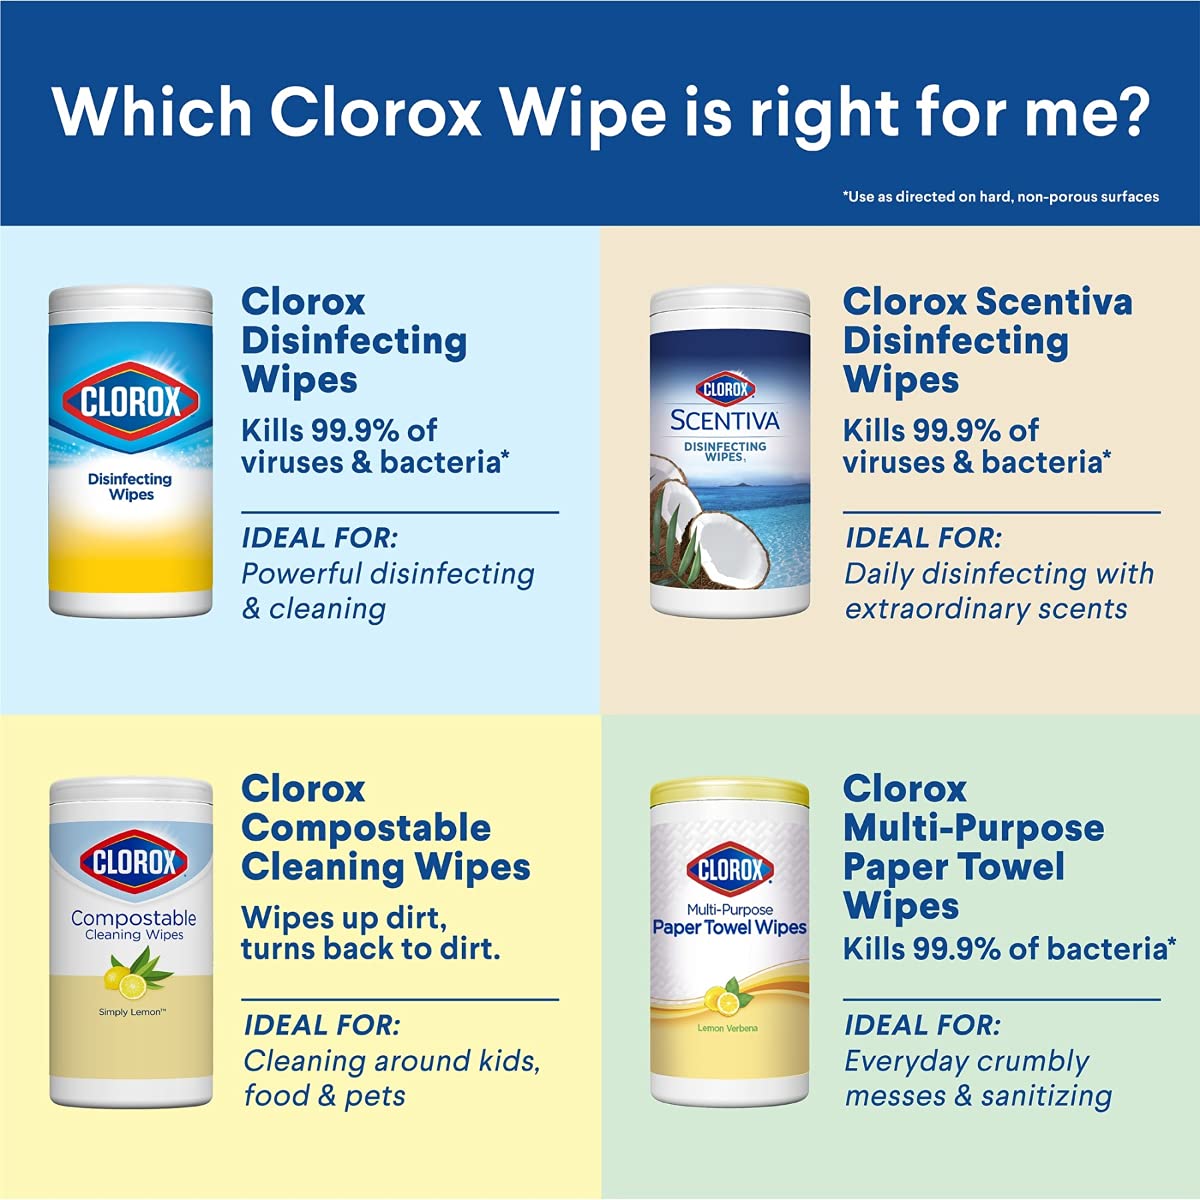 Clorox Disinfecting Wipes, Bleach Free Cleaning Wipes, Multi-surface Wipes with Moisture Seal Lid, Easy Pull Wipes Pack, Fresh Scent, 75 Wipes (Pack of 3) - Packaging May Vary